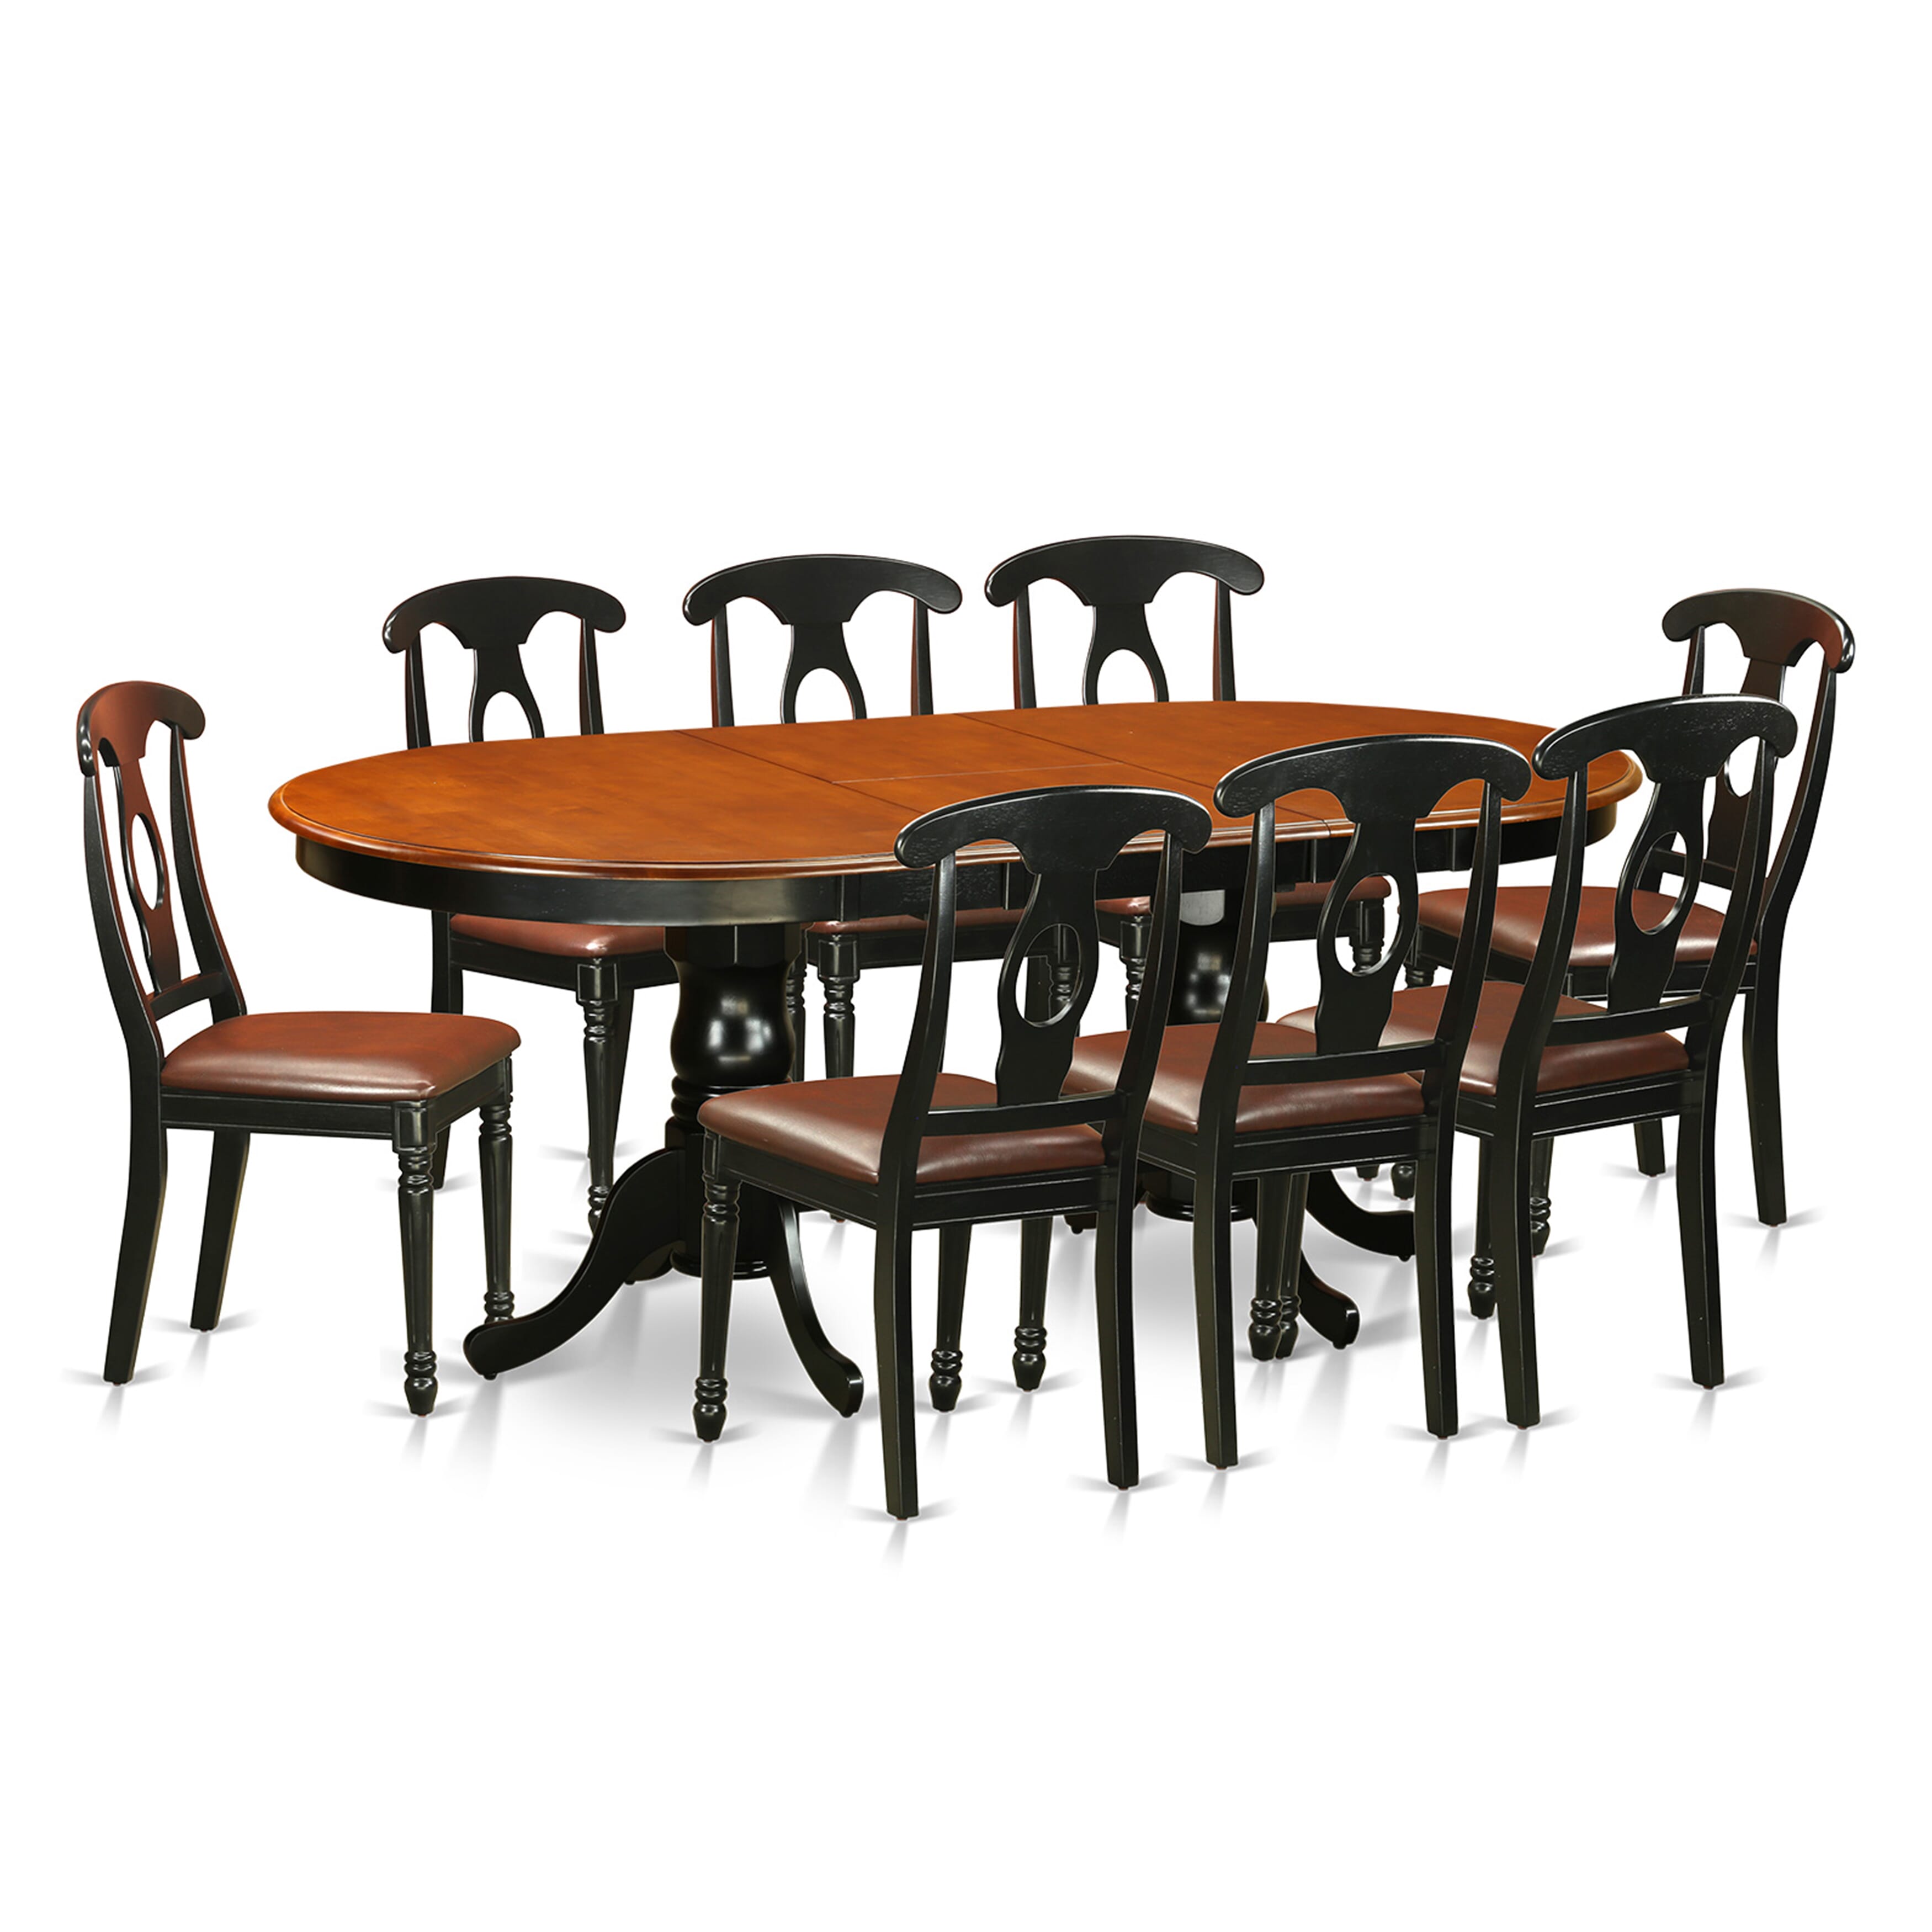 9 Pc Oval Dining room Table with Leaf and Leatherette Seat Chairs in Black / Cherry